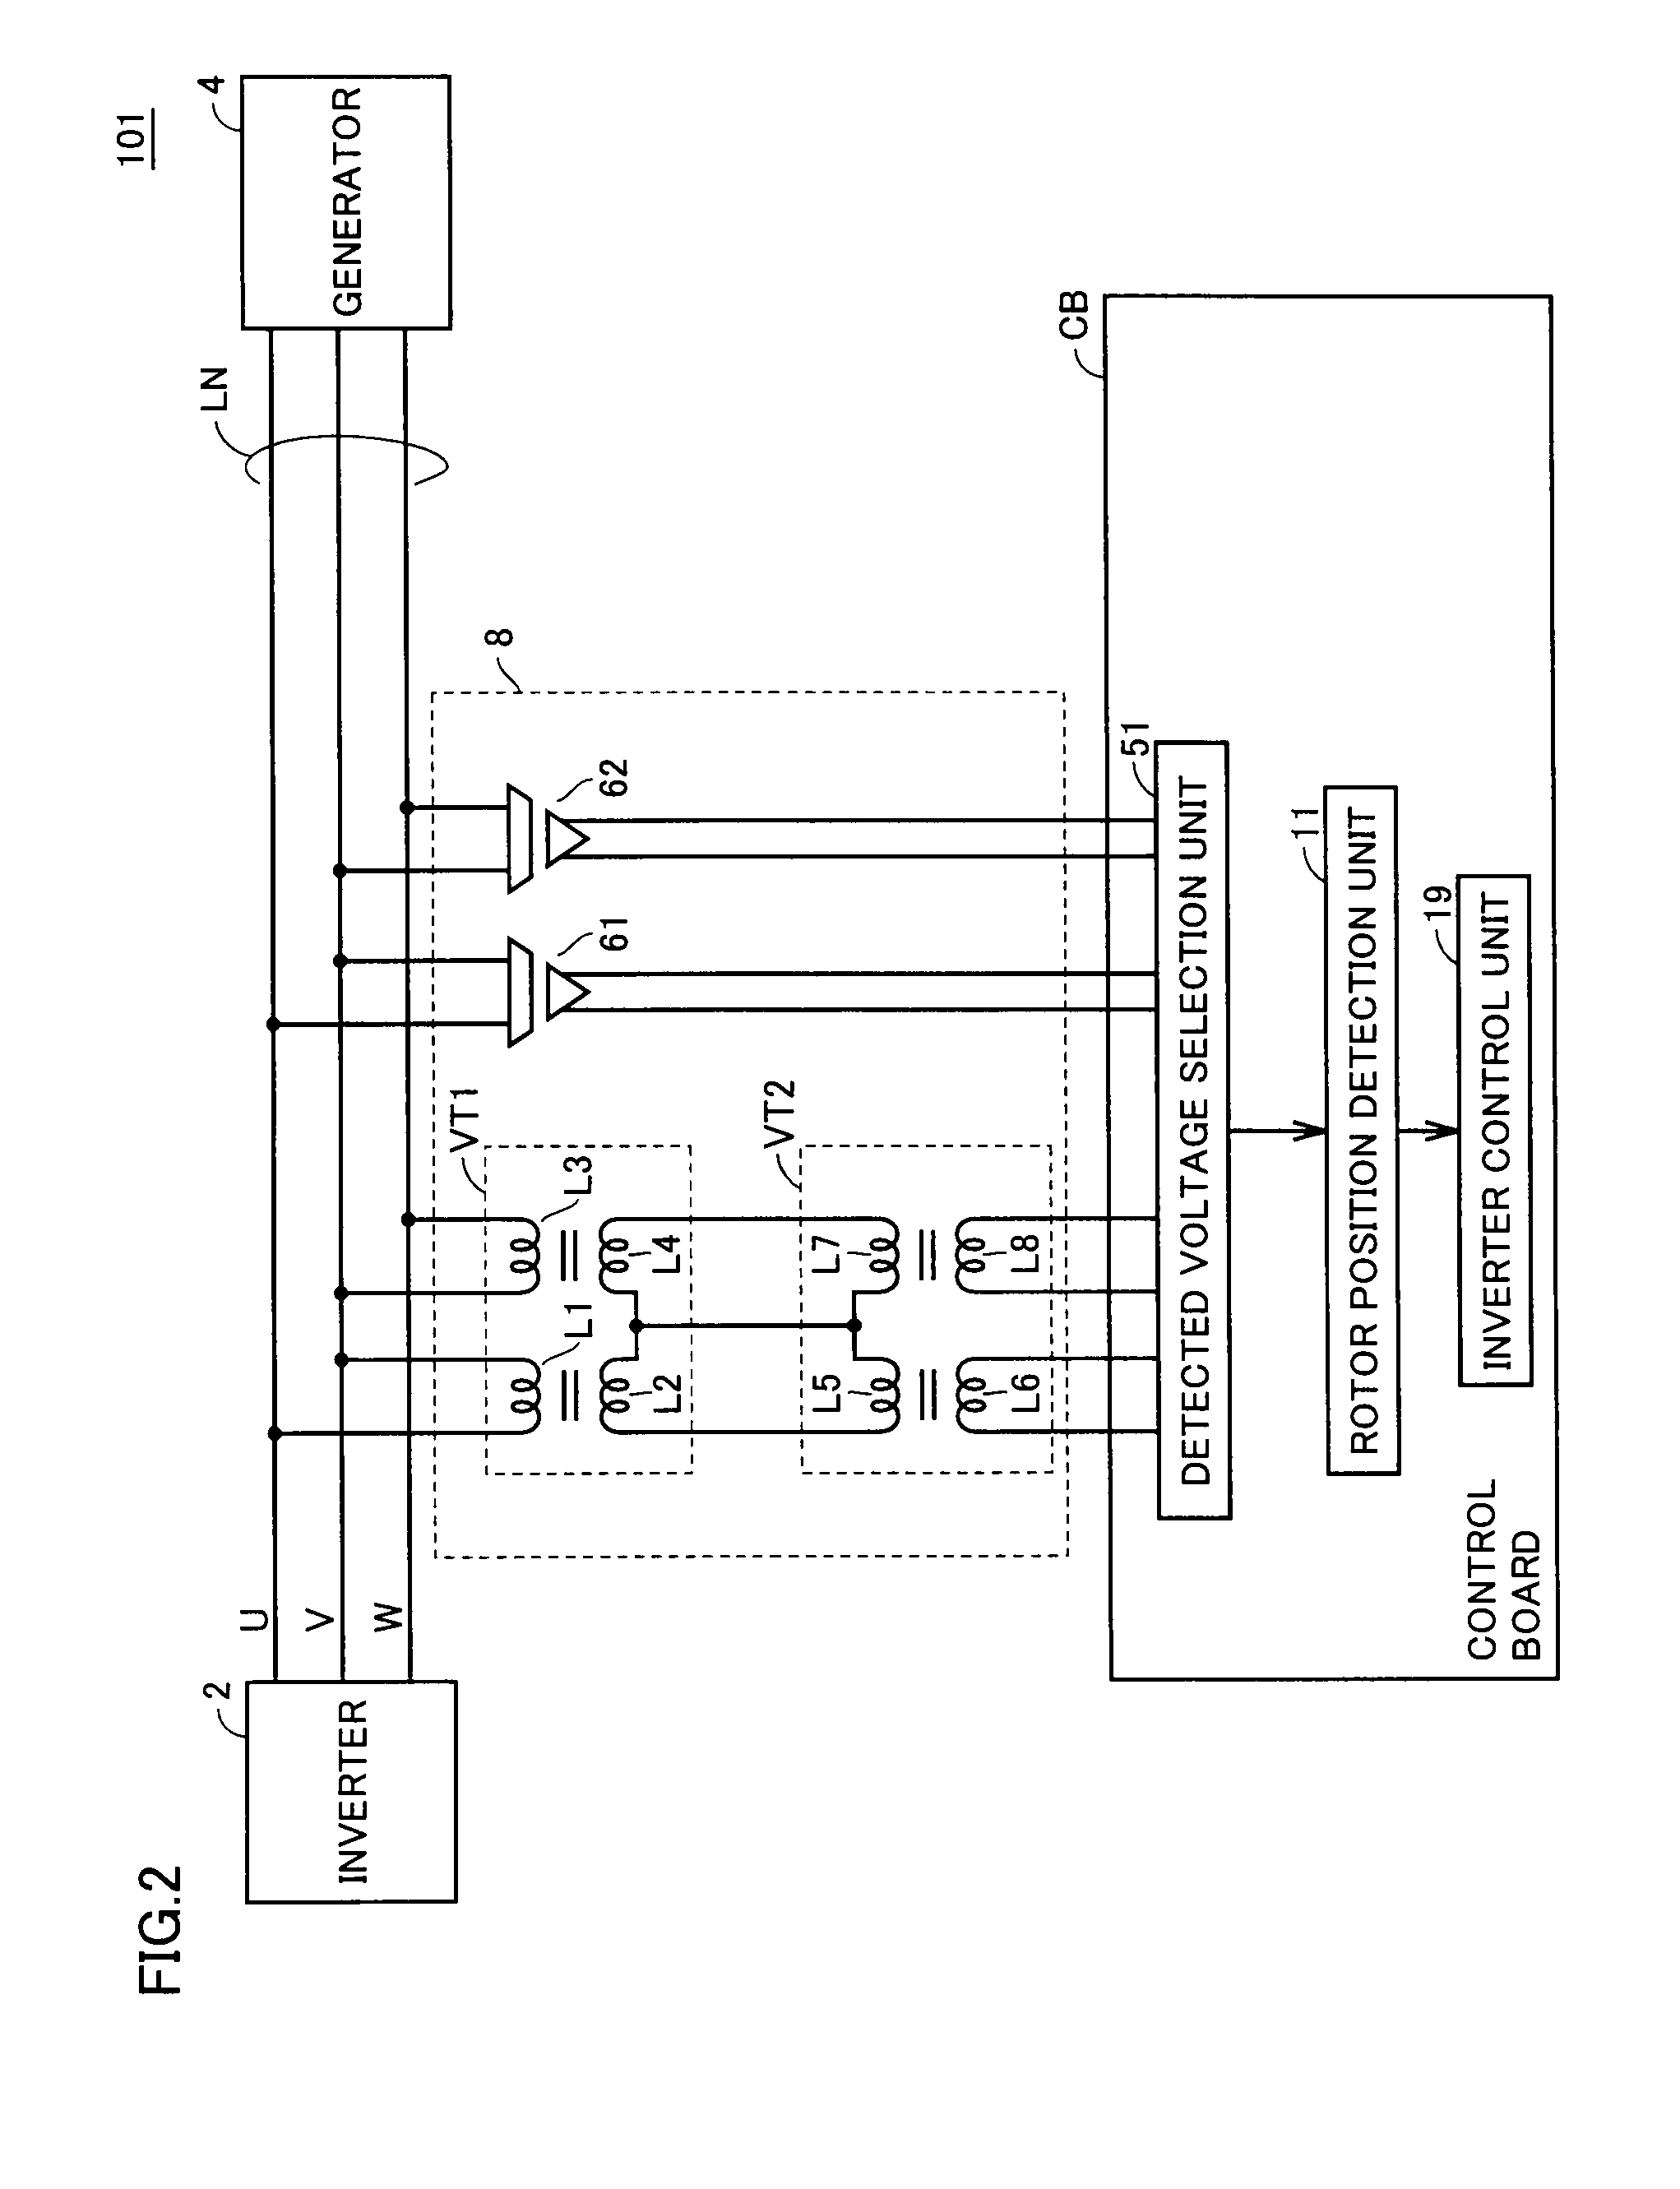 Synchronous machine starting device